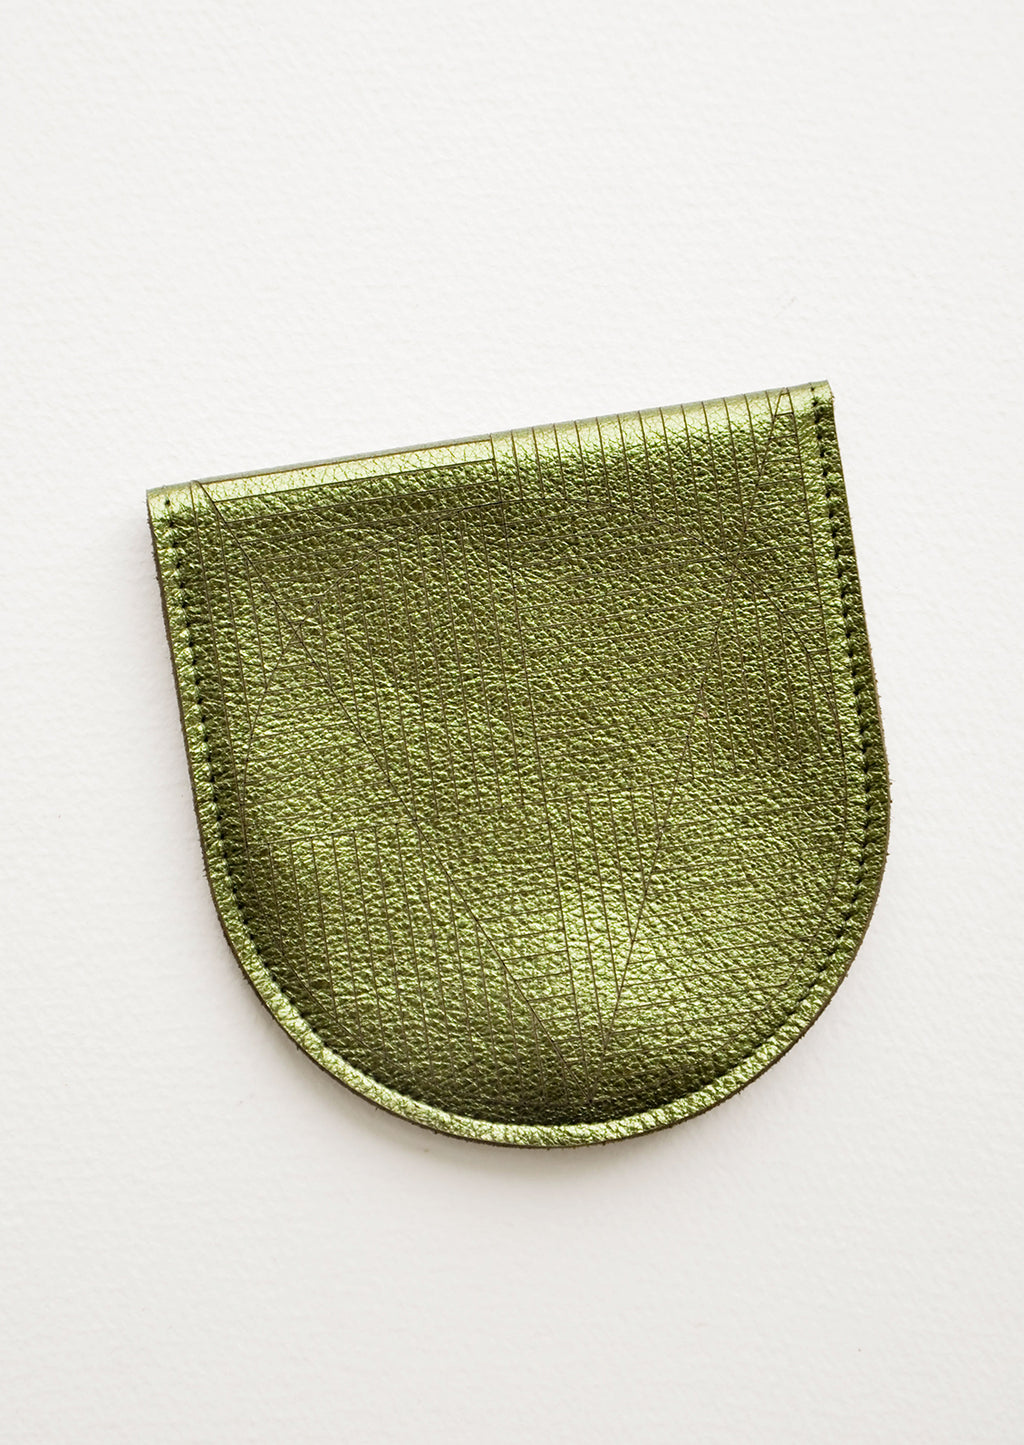 Metallic Olive: A metallic green leather half-oval wallet with a subtle geometric pattern.